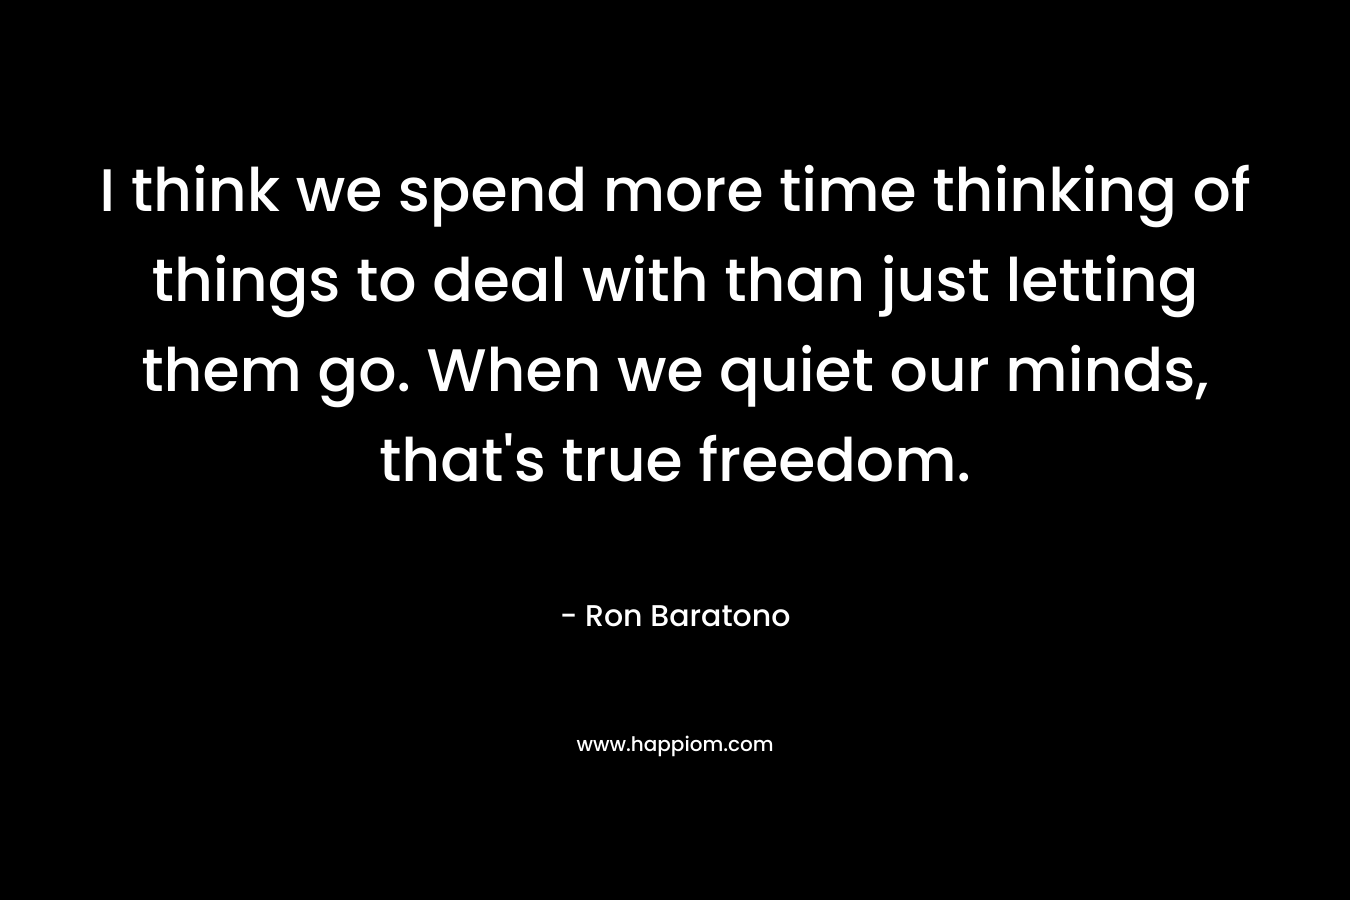 I think we spend more time thinking of things to deal with than just letting them go. When we quiet our minds, that's true freedom.